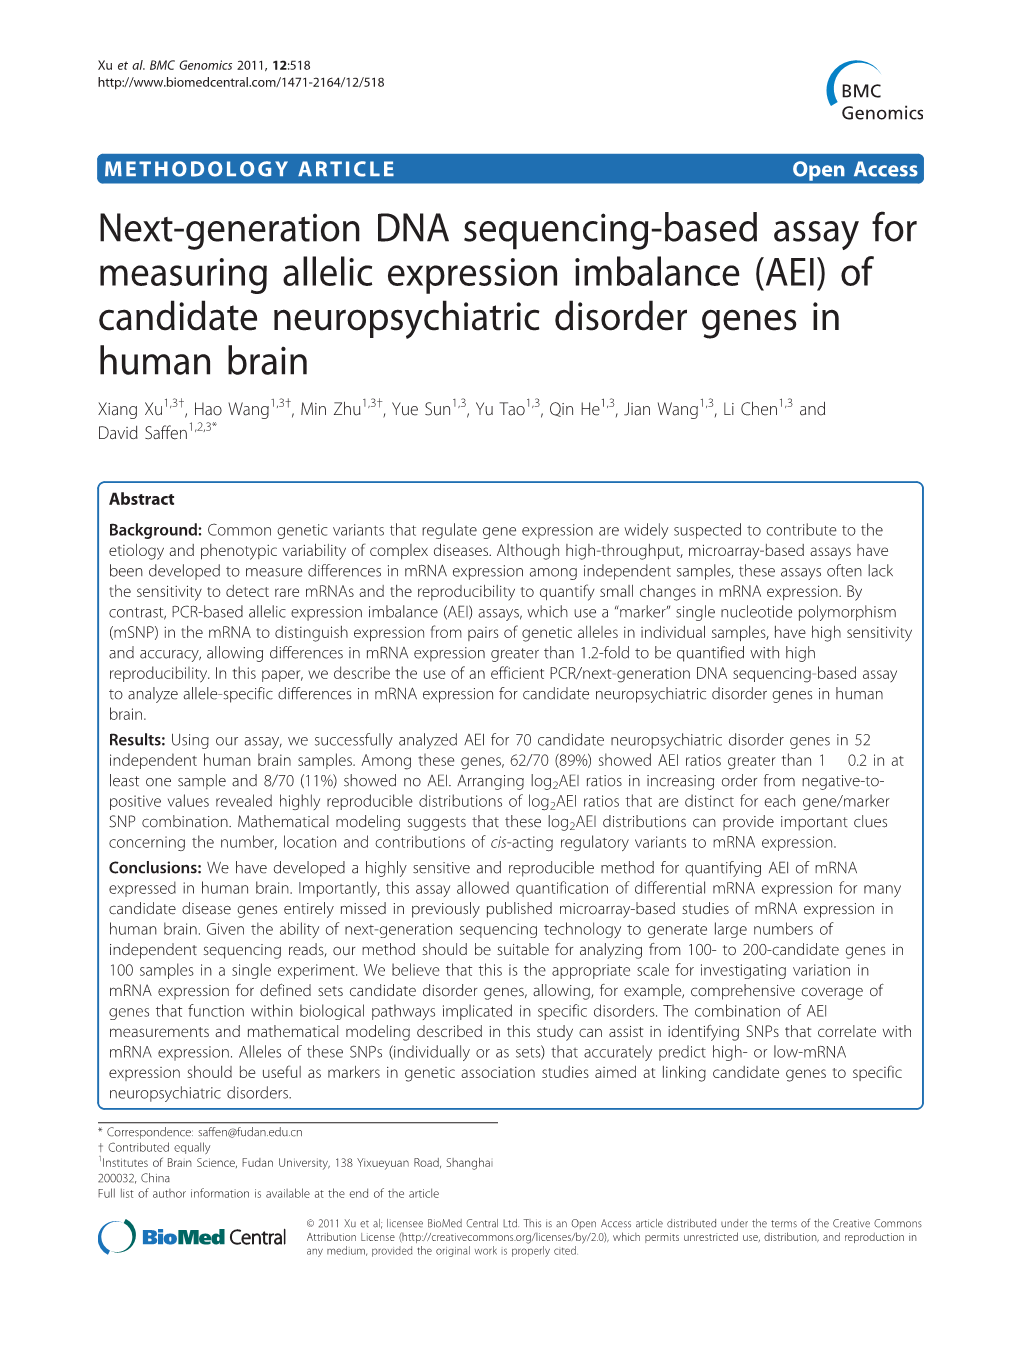 Next-Generation DNA Sequencing-Based Assay for Measuring Allelic